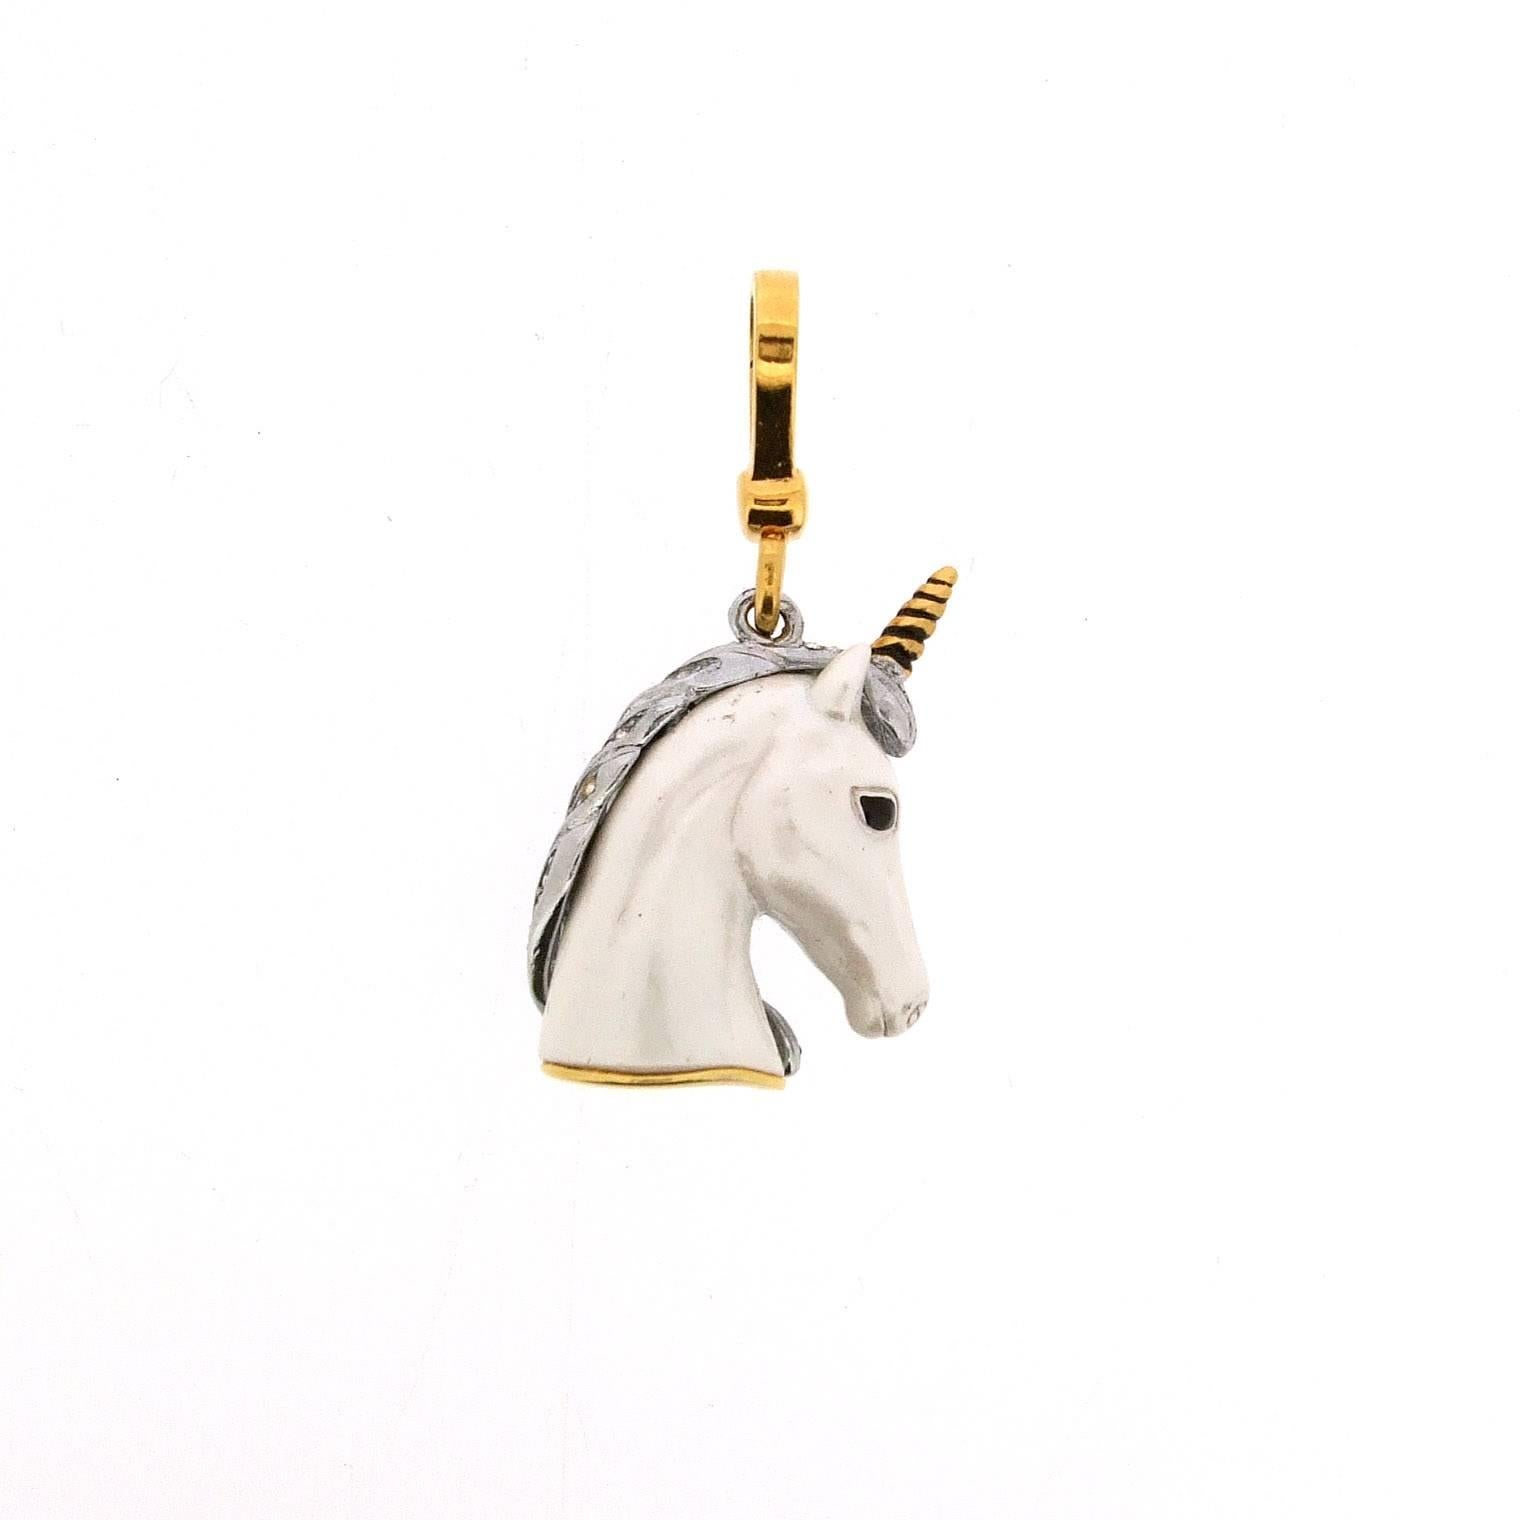 A stunning unicorn charm by Juicy Couture. Painted with glowing white moonglow enamel and set with a crystal encrusted silver tone mane and 14k gold plated lobster clasp. 

It measures 4.9cm from tip of loop to the bottom, 4cm from tip of horn to